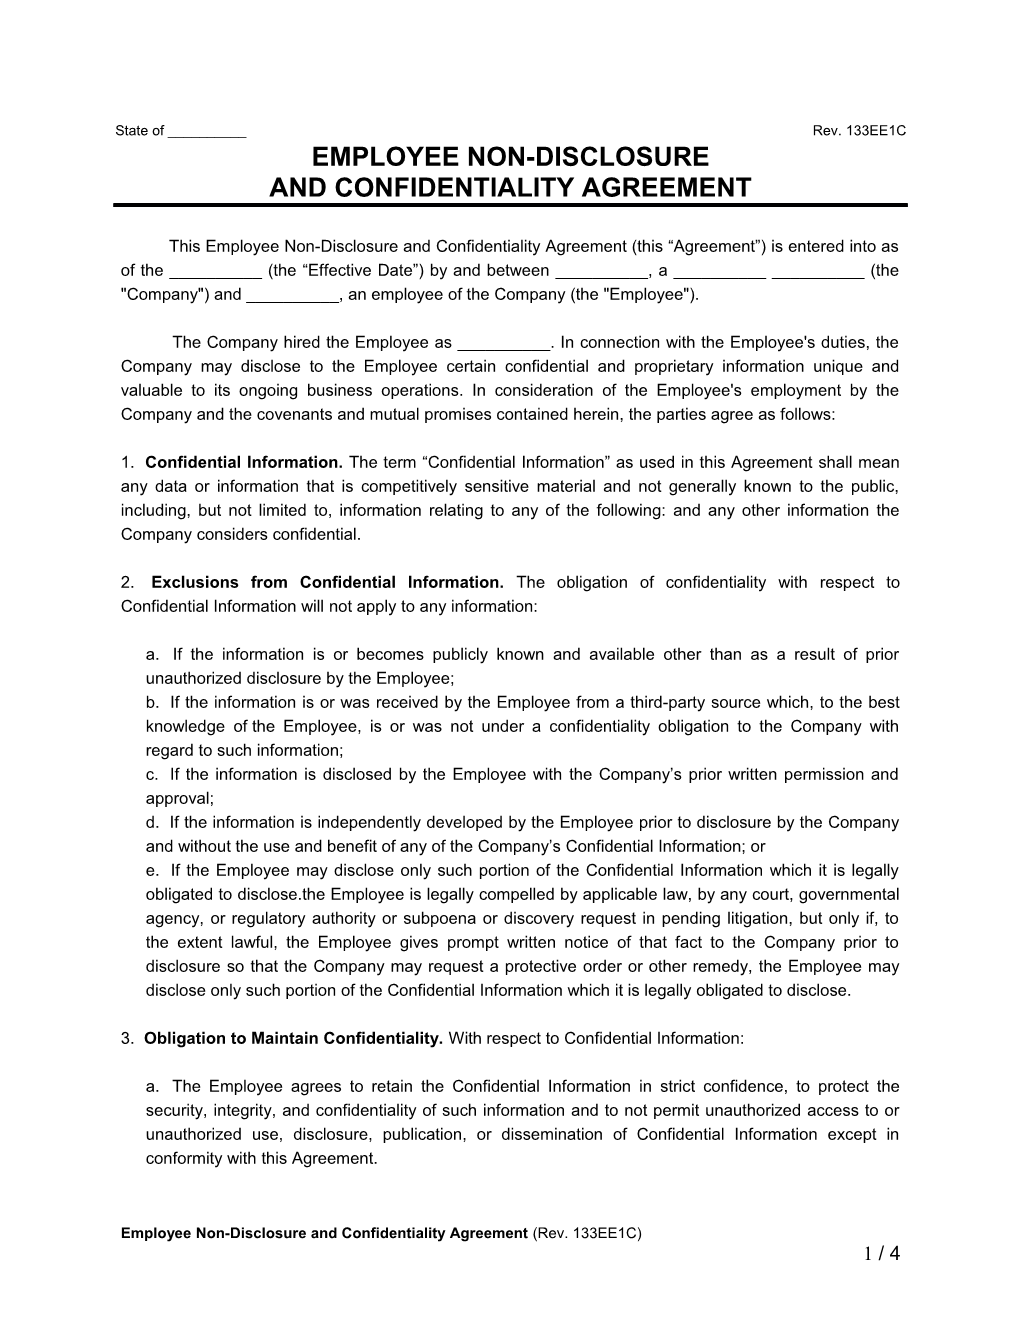 This Employee Non-Disclosure and Confidentiality Agreement (This Agreement ) Is Entered